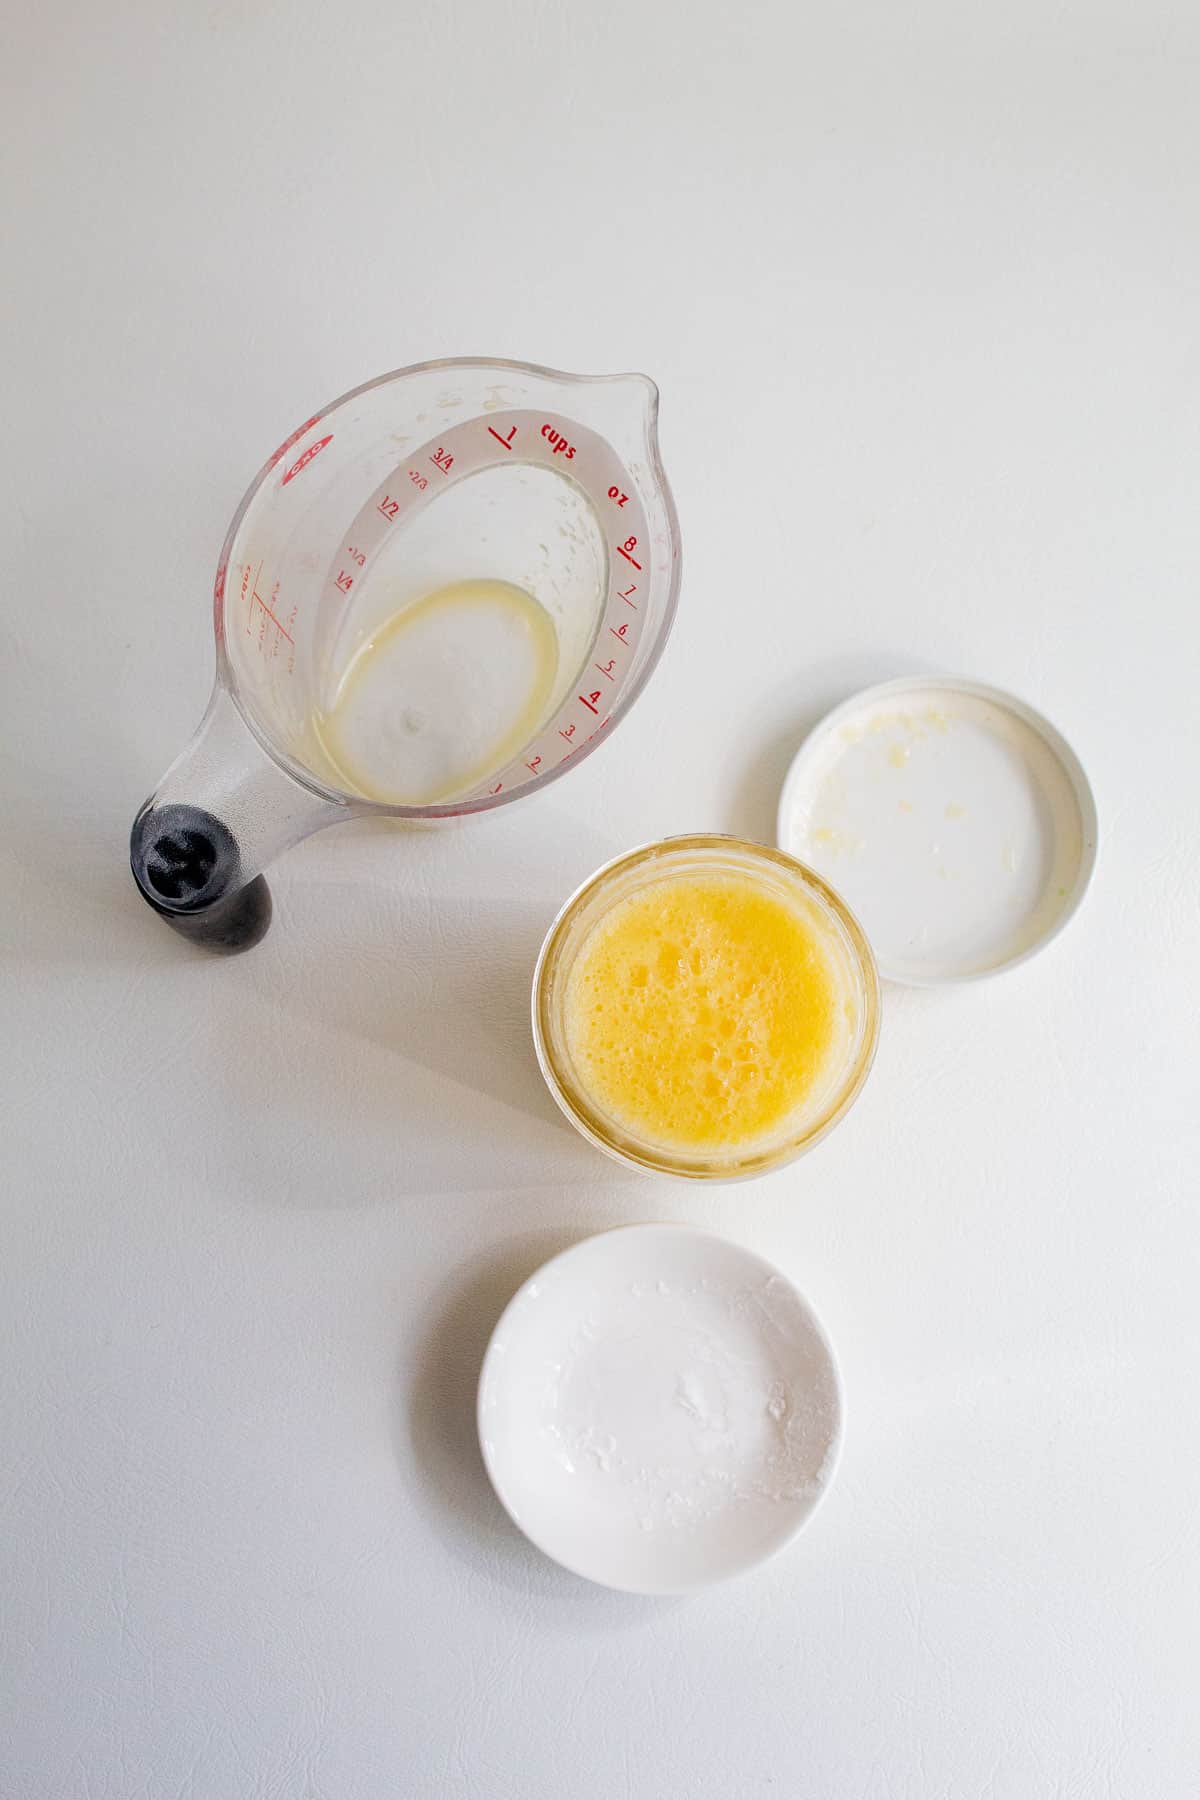 A measuring cup, jelly jar, and dish for the preparation of the orange juice and cornstarch slurry.